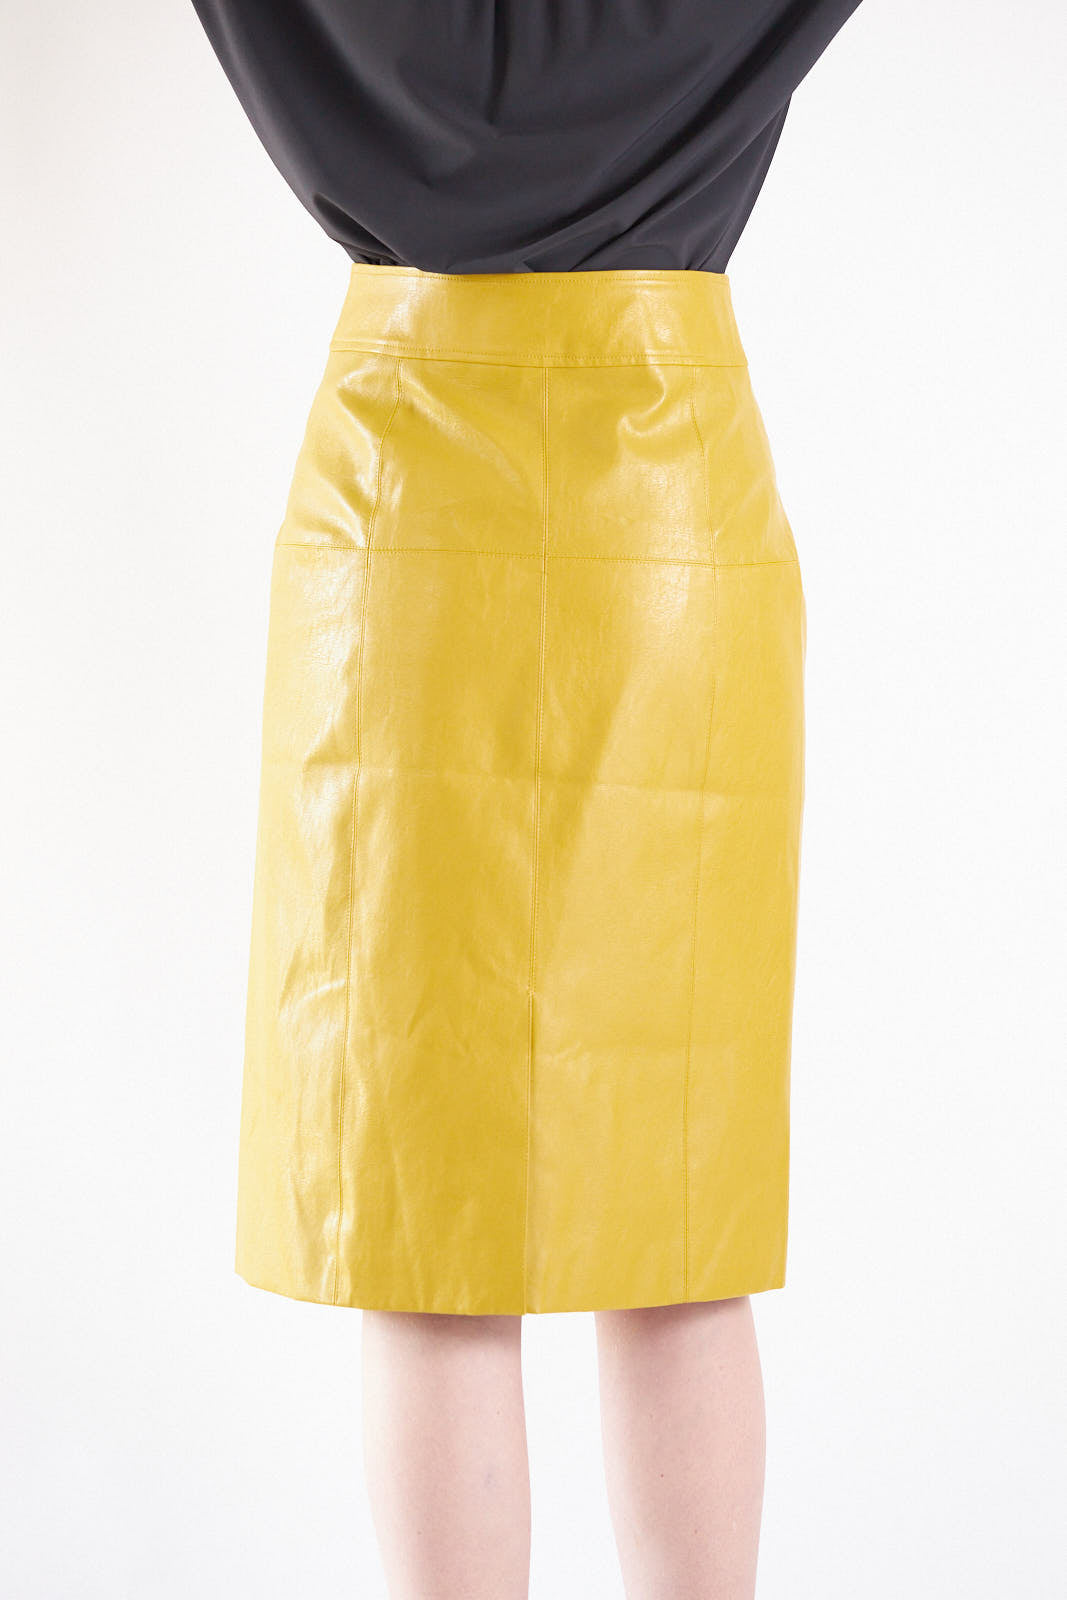 Woman wearing a yellow Glossy Vegan Leather Pencil Skirt from Mauve Daisy against a white background.